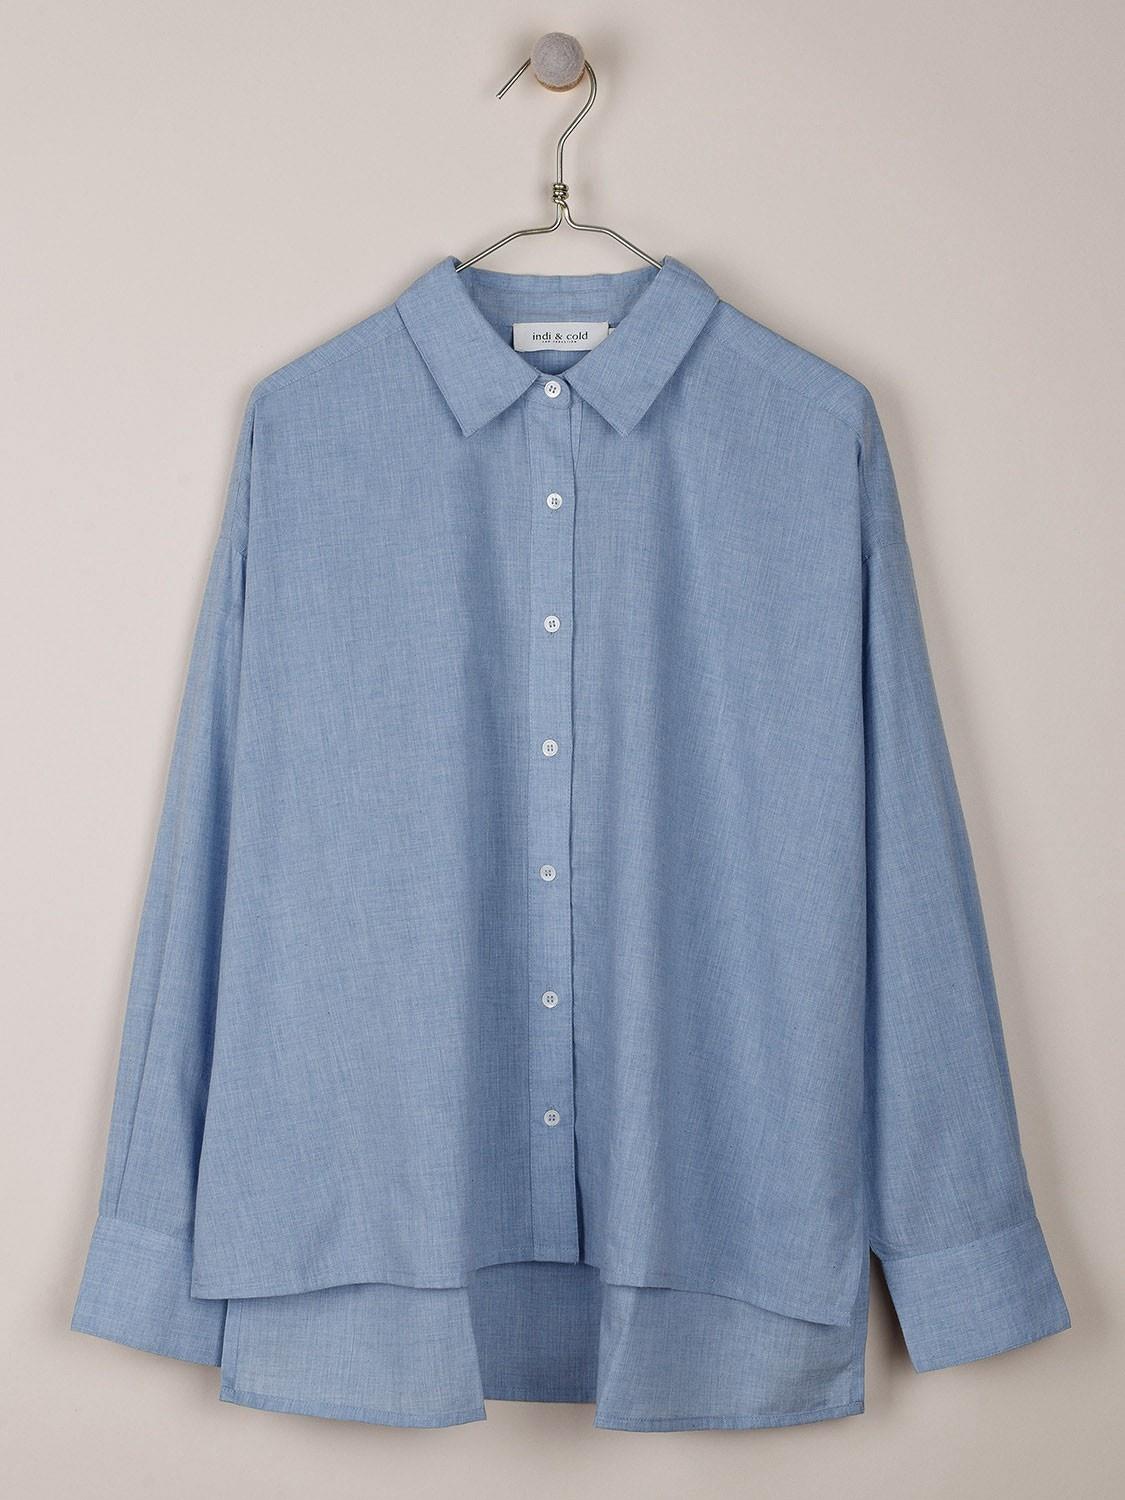 camisa-oversize-de-indi-and-cold